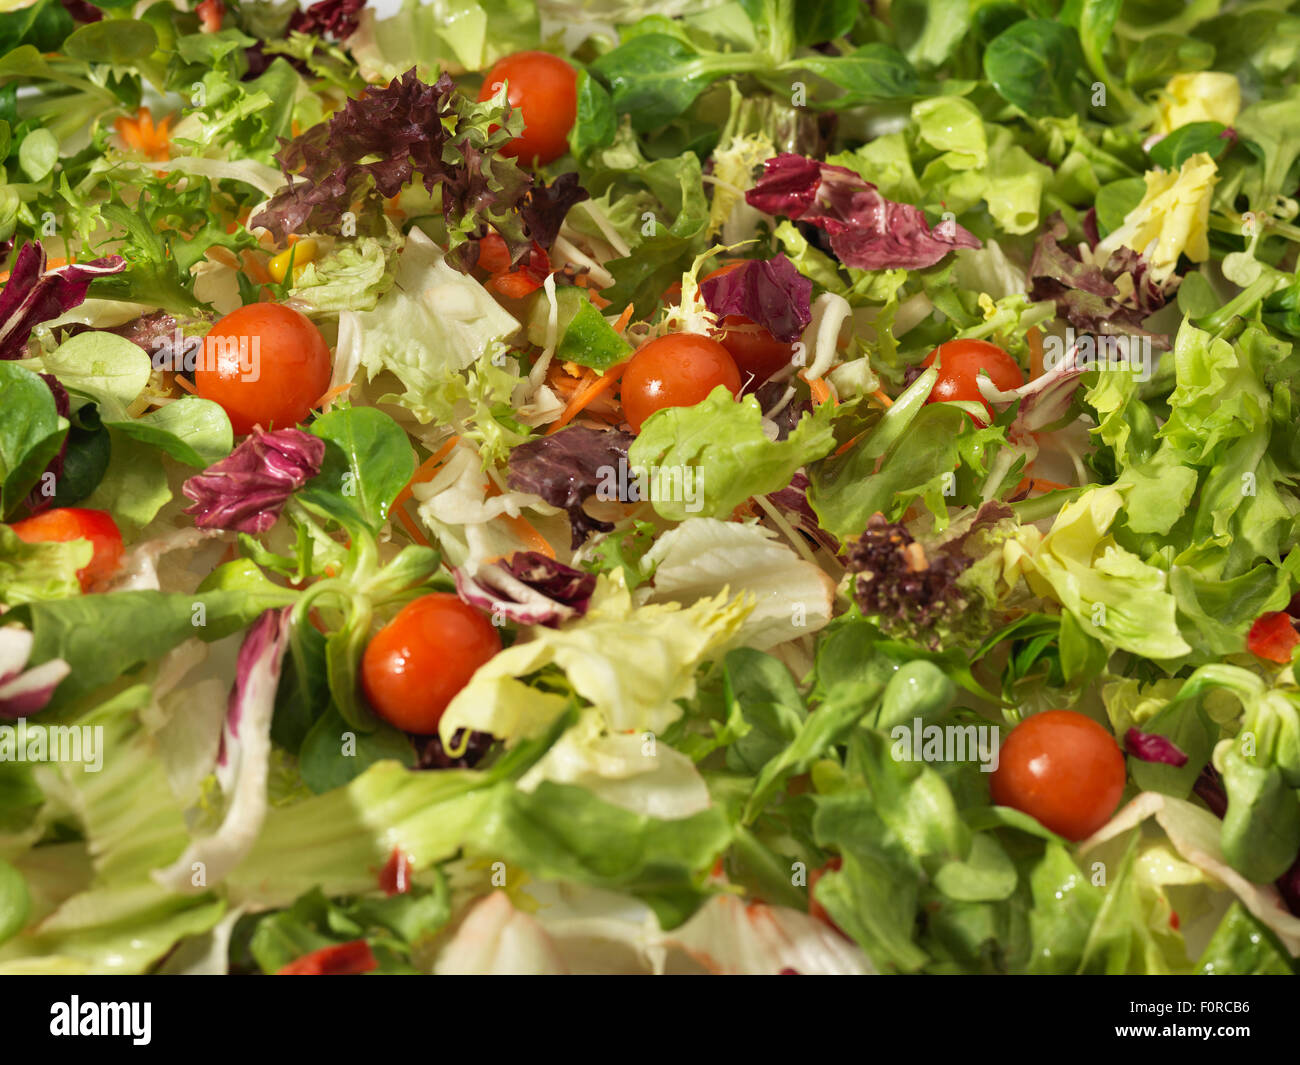 Close up, full frame, shot of fresh salad with a wide variety of vegetables taken with a shallow depth of field. I deal for use Stock Photo